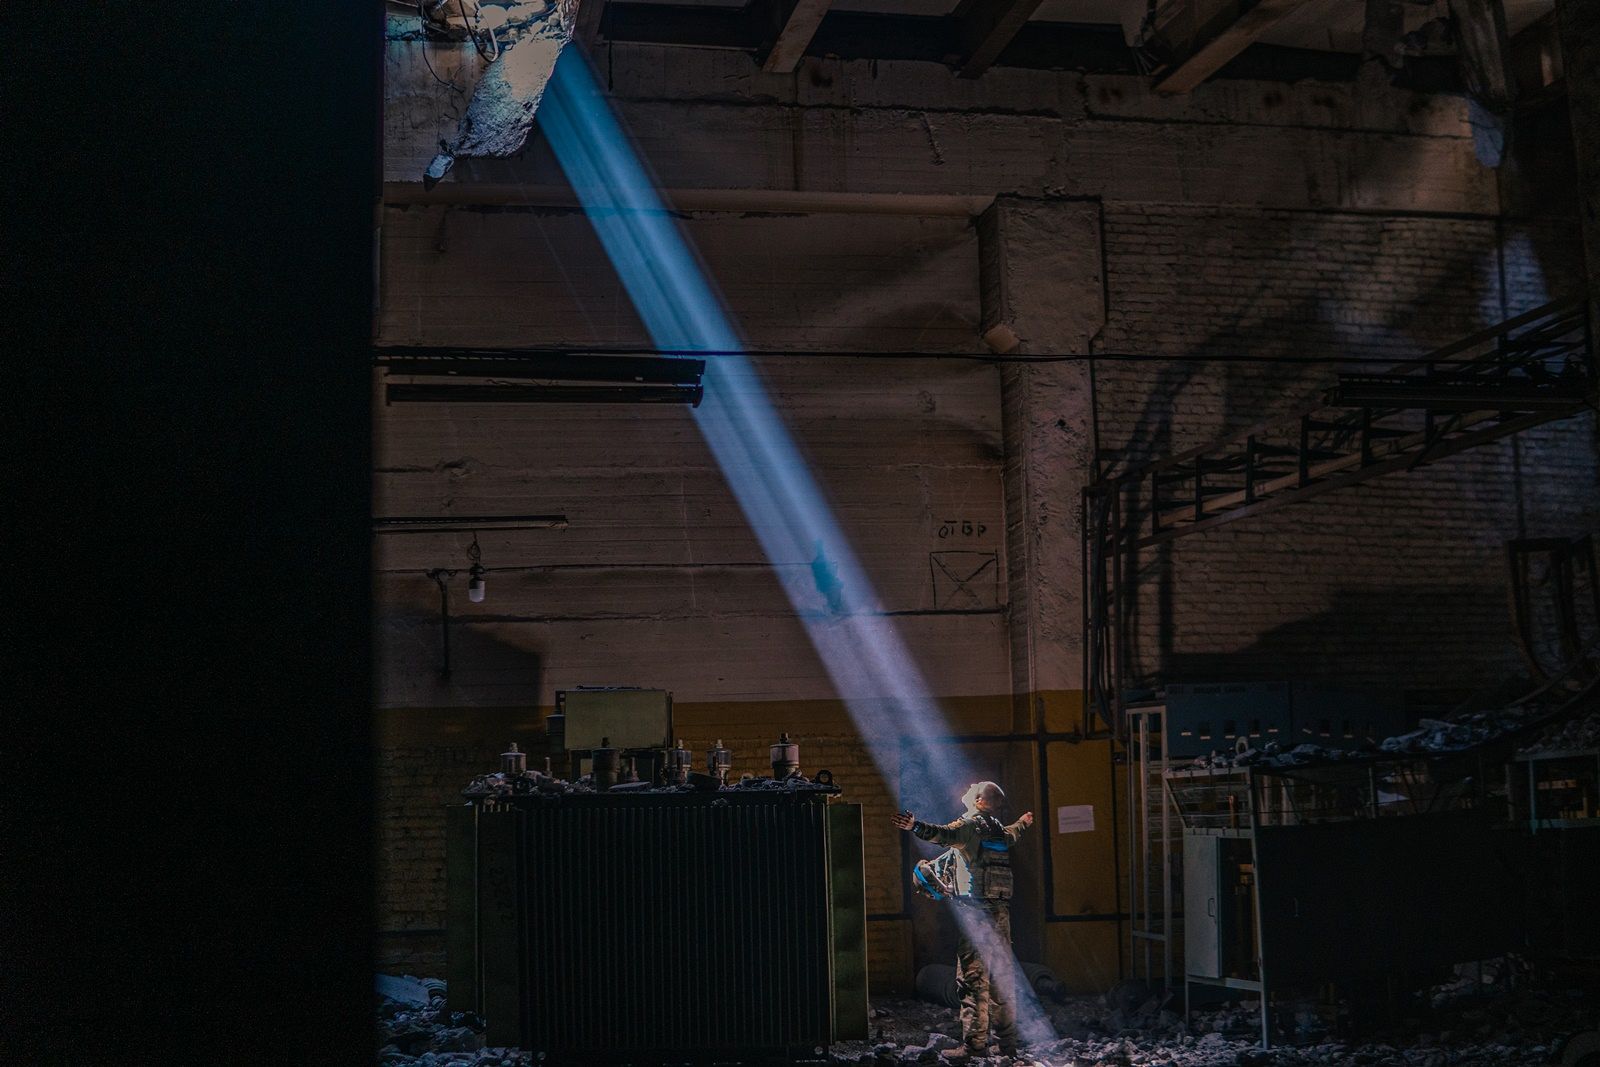 The pictures taken by Kozatskyi depict the Ukrainian resistance inside the Azovstal steel plant, the last stronghold in Mariupol.